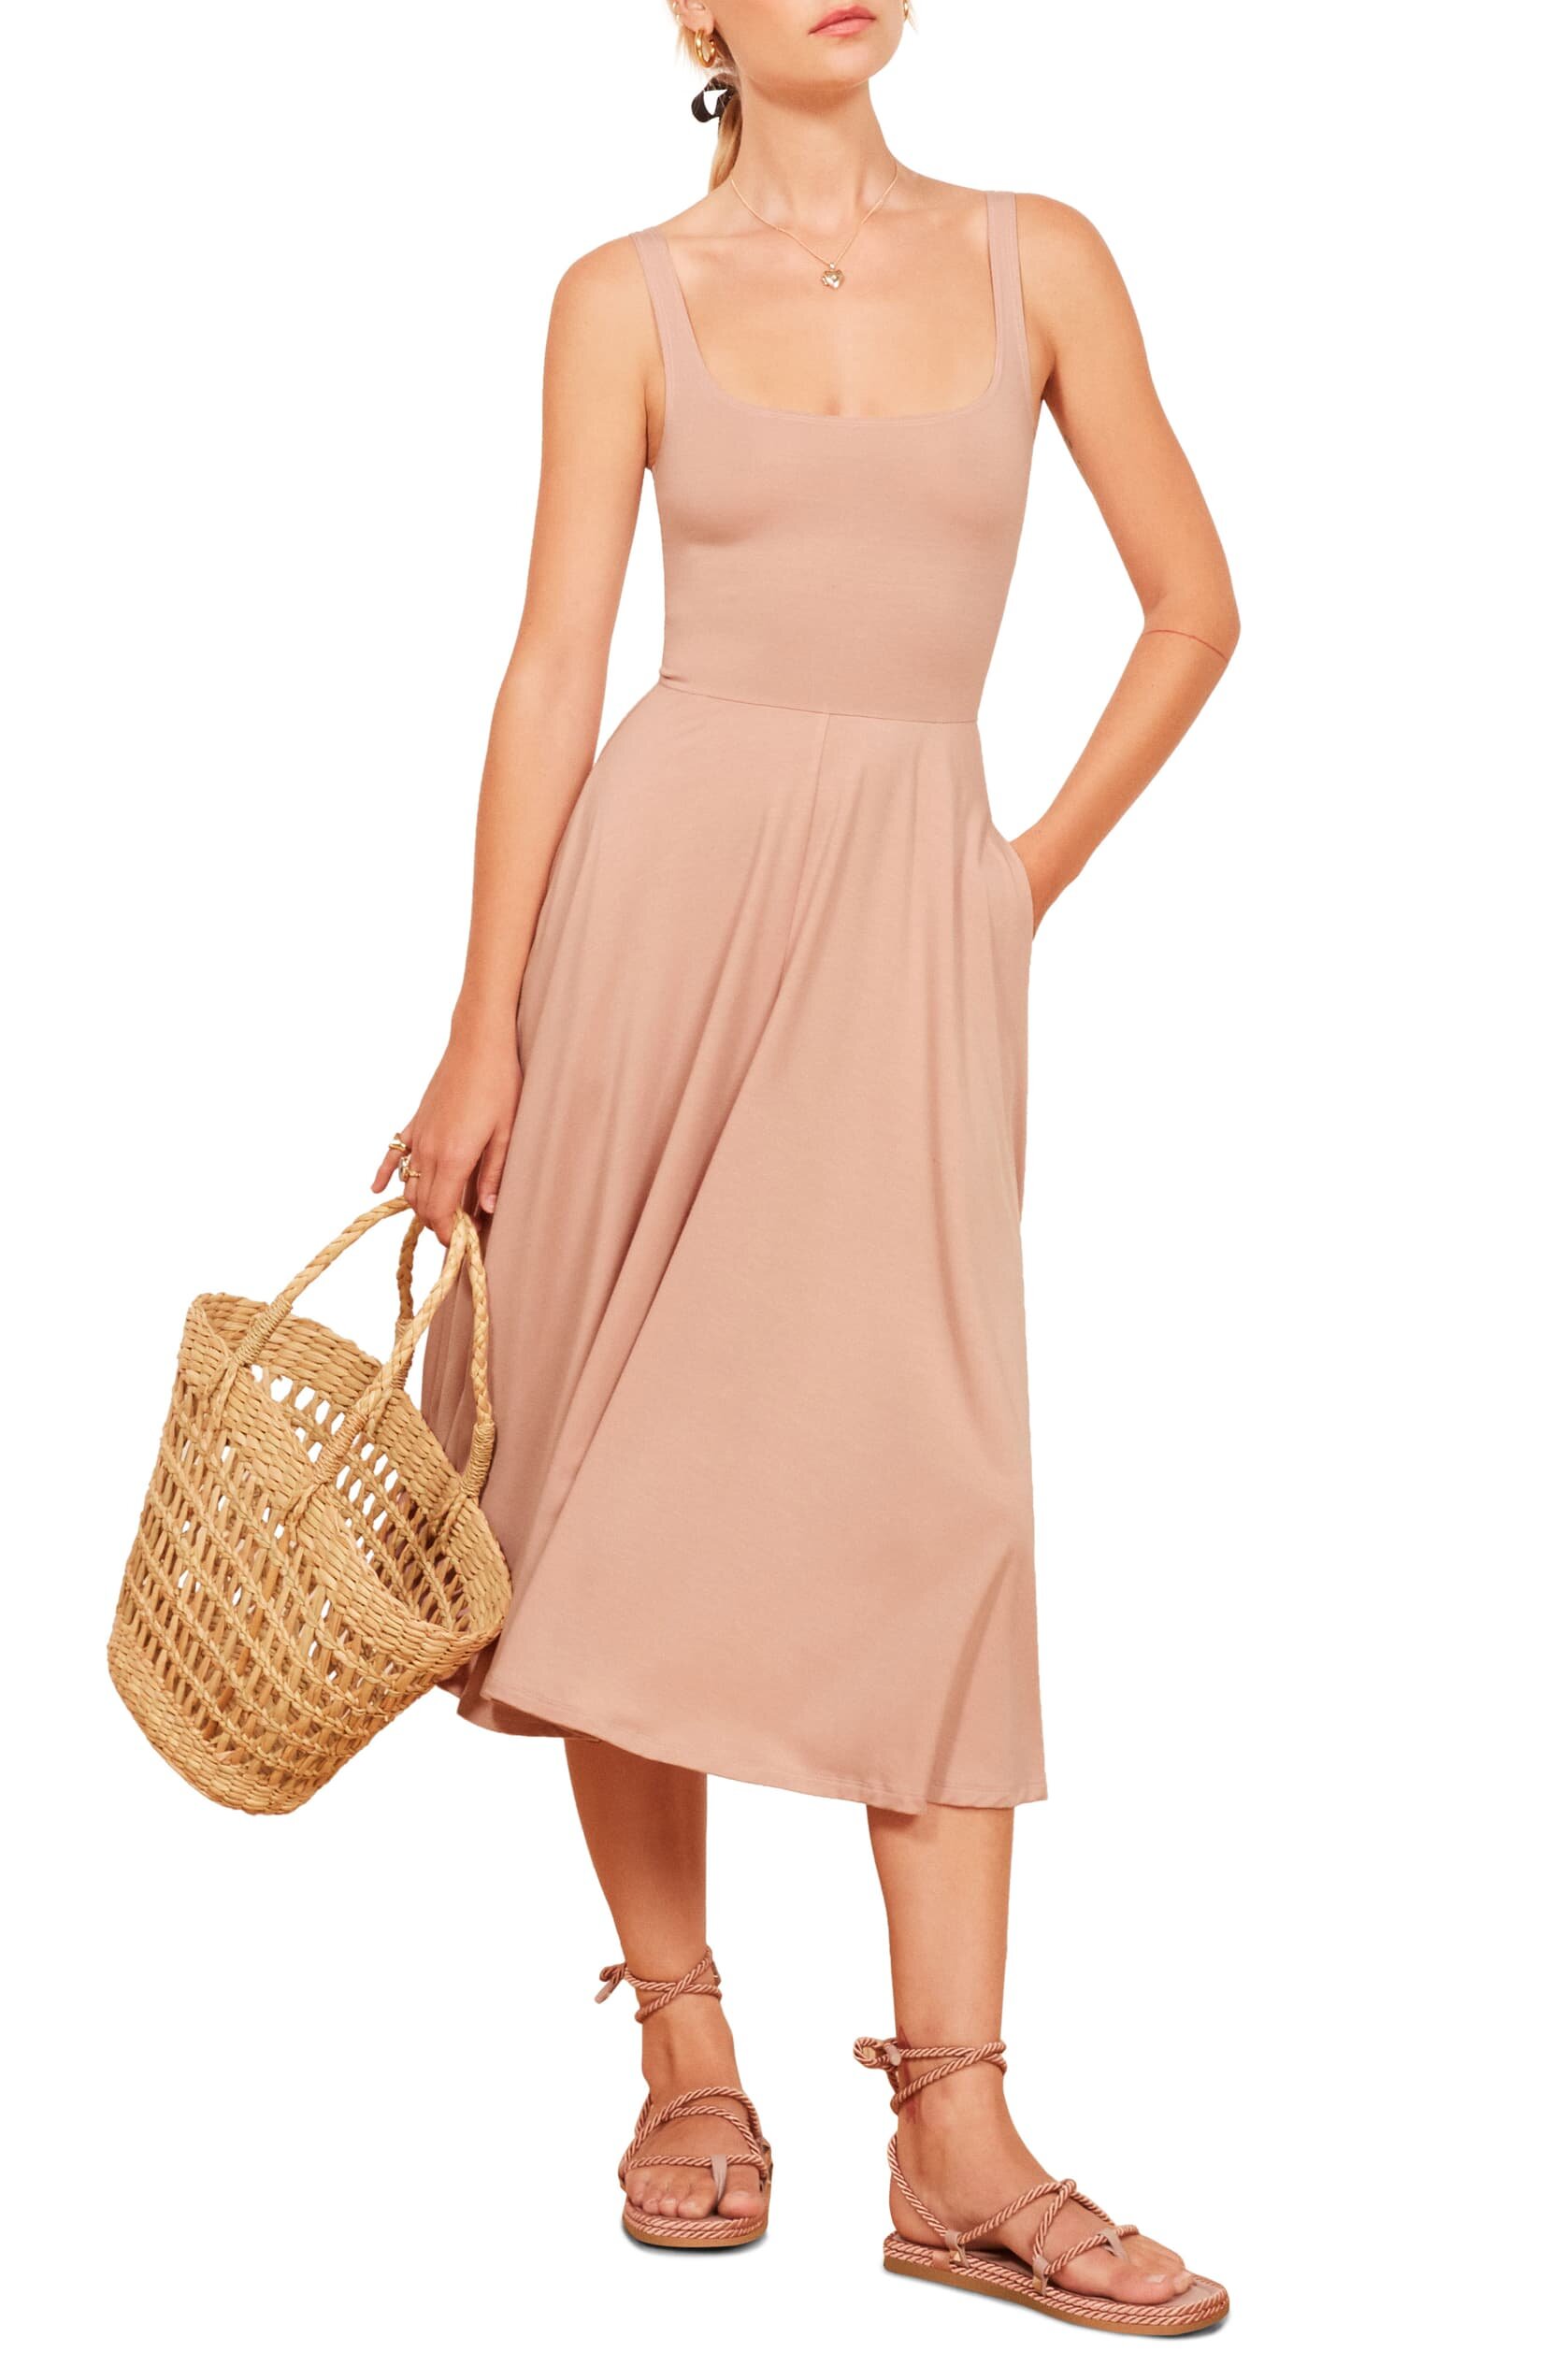 Available in black or blush, this universally flattering dress is also eco friendly. Bam!